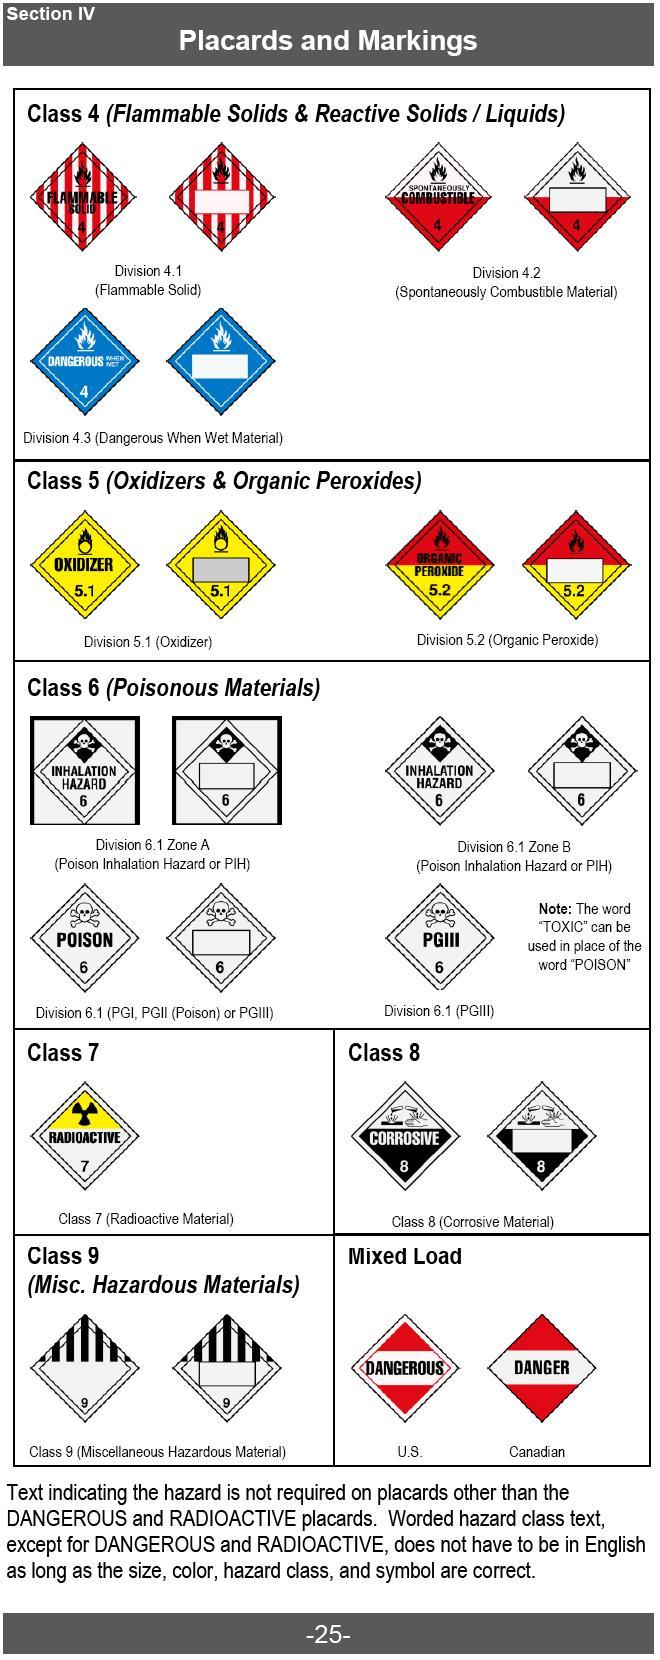 g. Some shipments of hazardous material require subsidiary placards that represent secondary hazards.